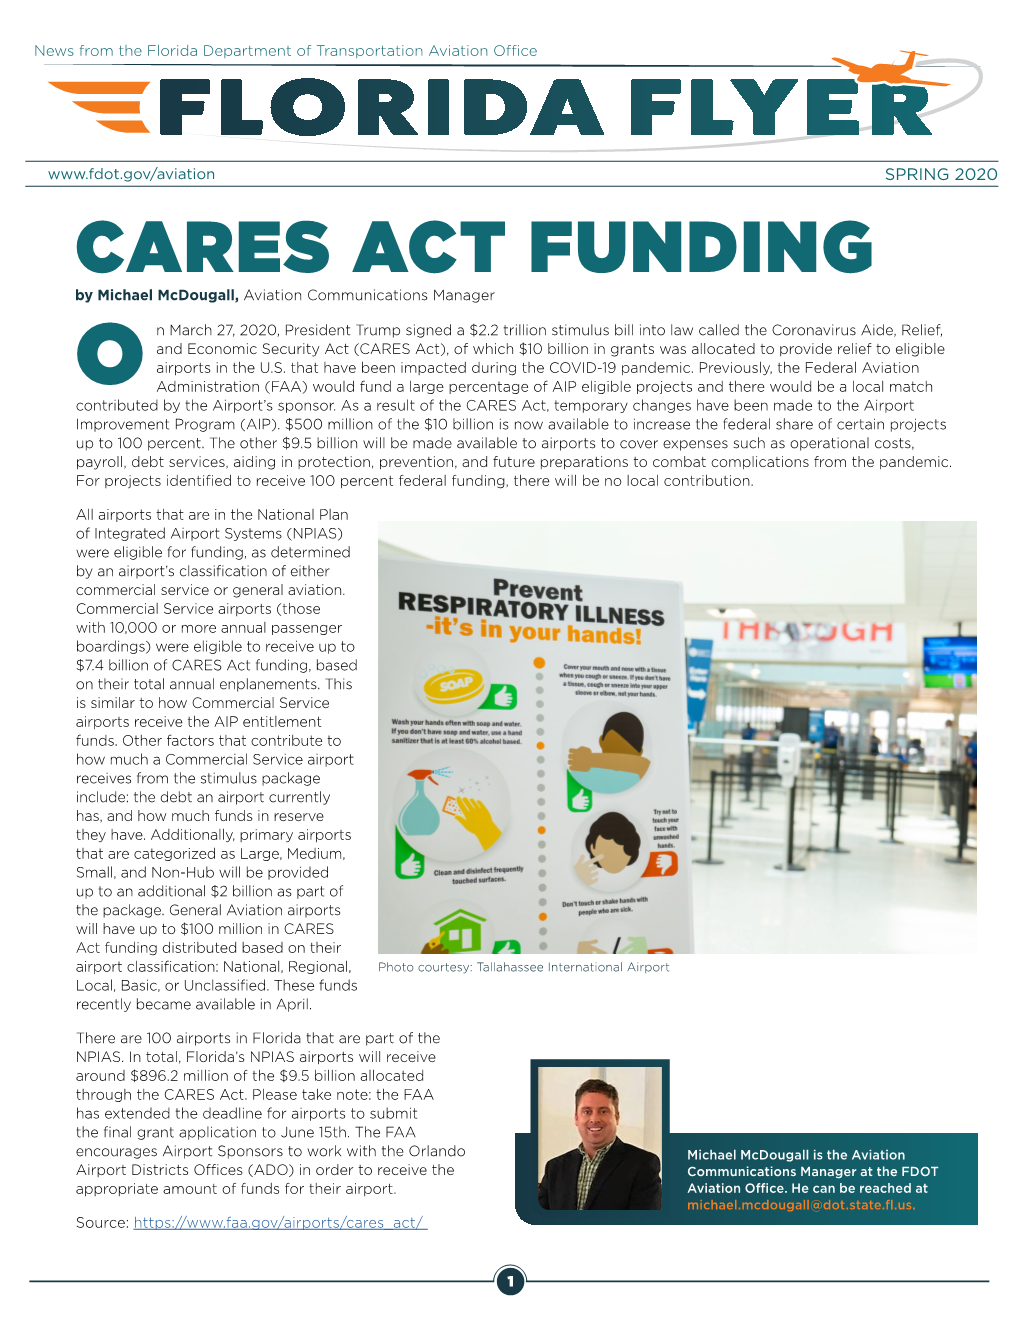 CARES ACT FUNDING by Michael Mcdougall, Aviation Communications Manager